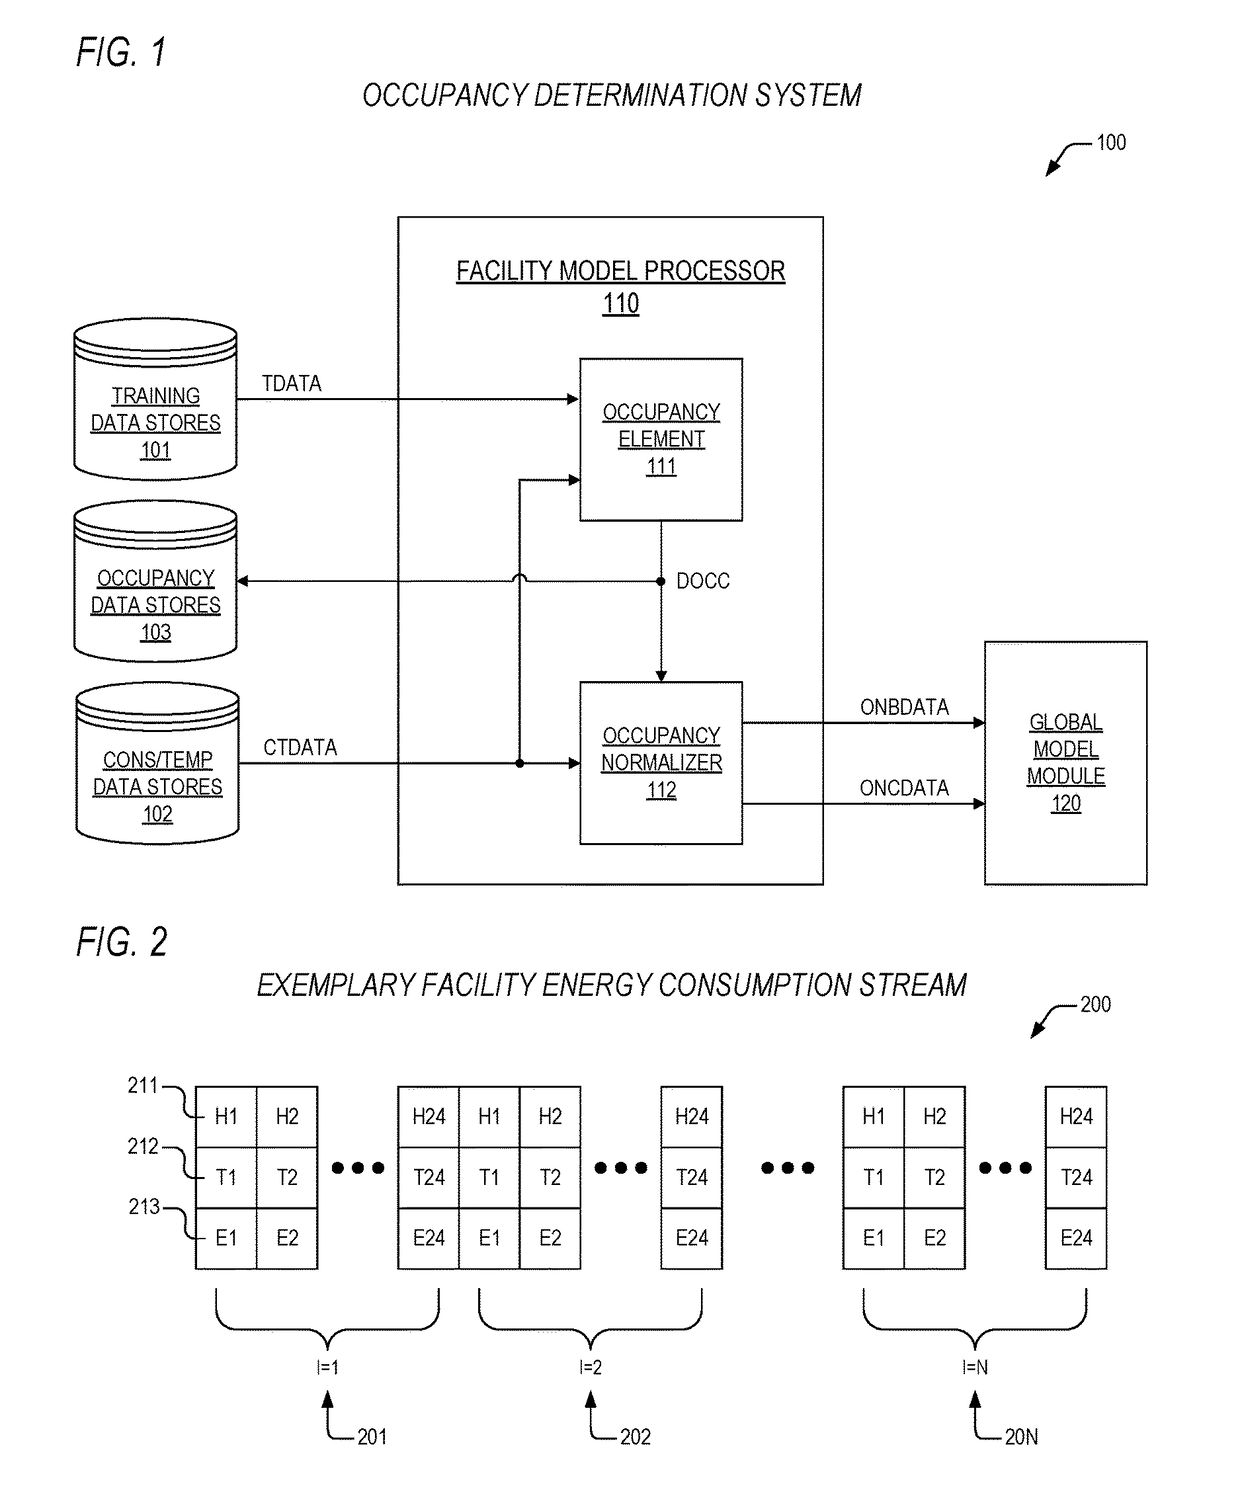 Apparatus and method for focused marketing messaging based on estimated building occupancy